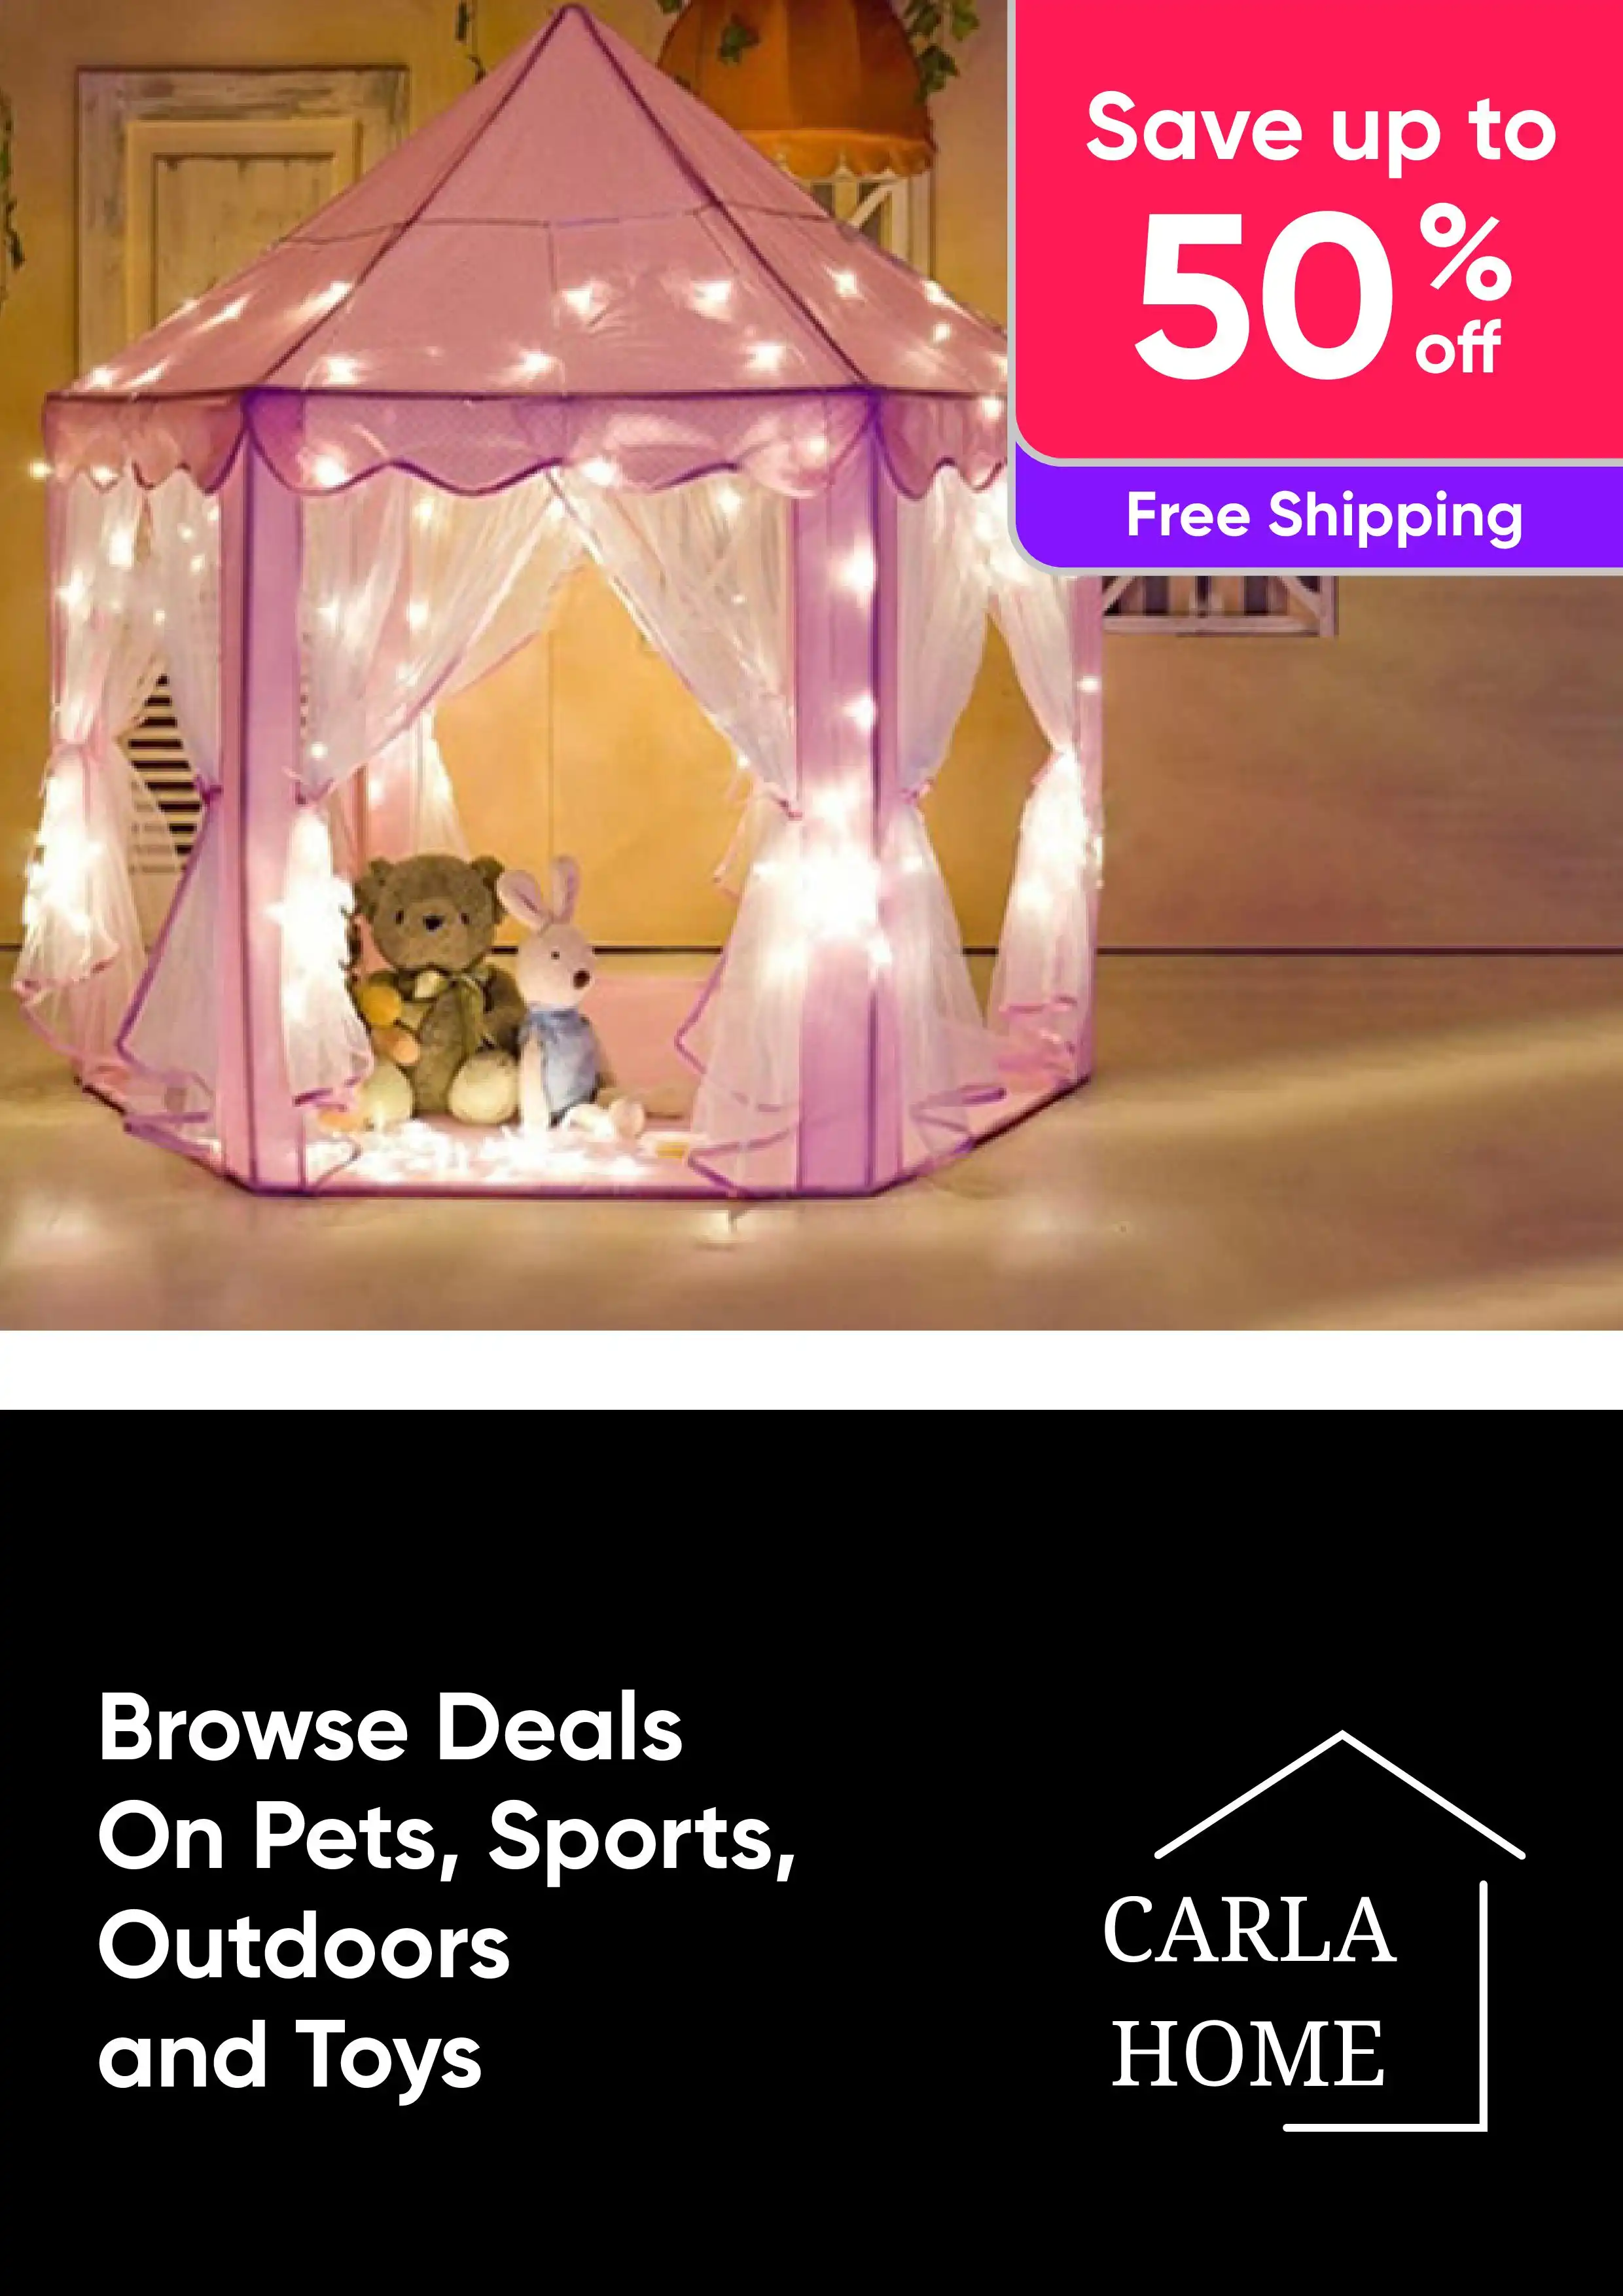 Browse Deals On Pets, Sports, Outdoors and Toys - Save Up To 55% Off RRP